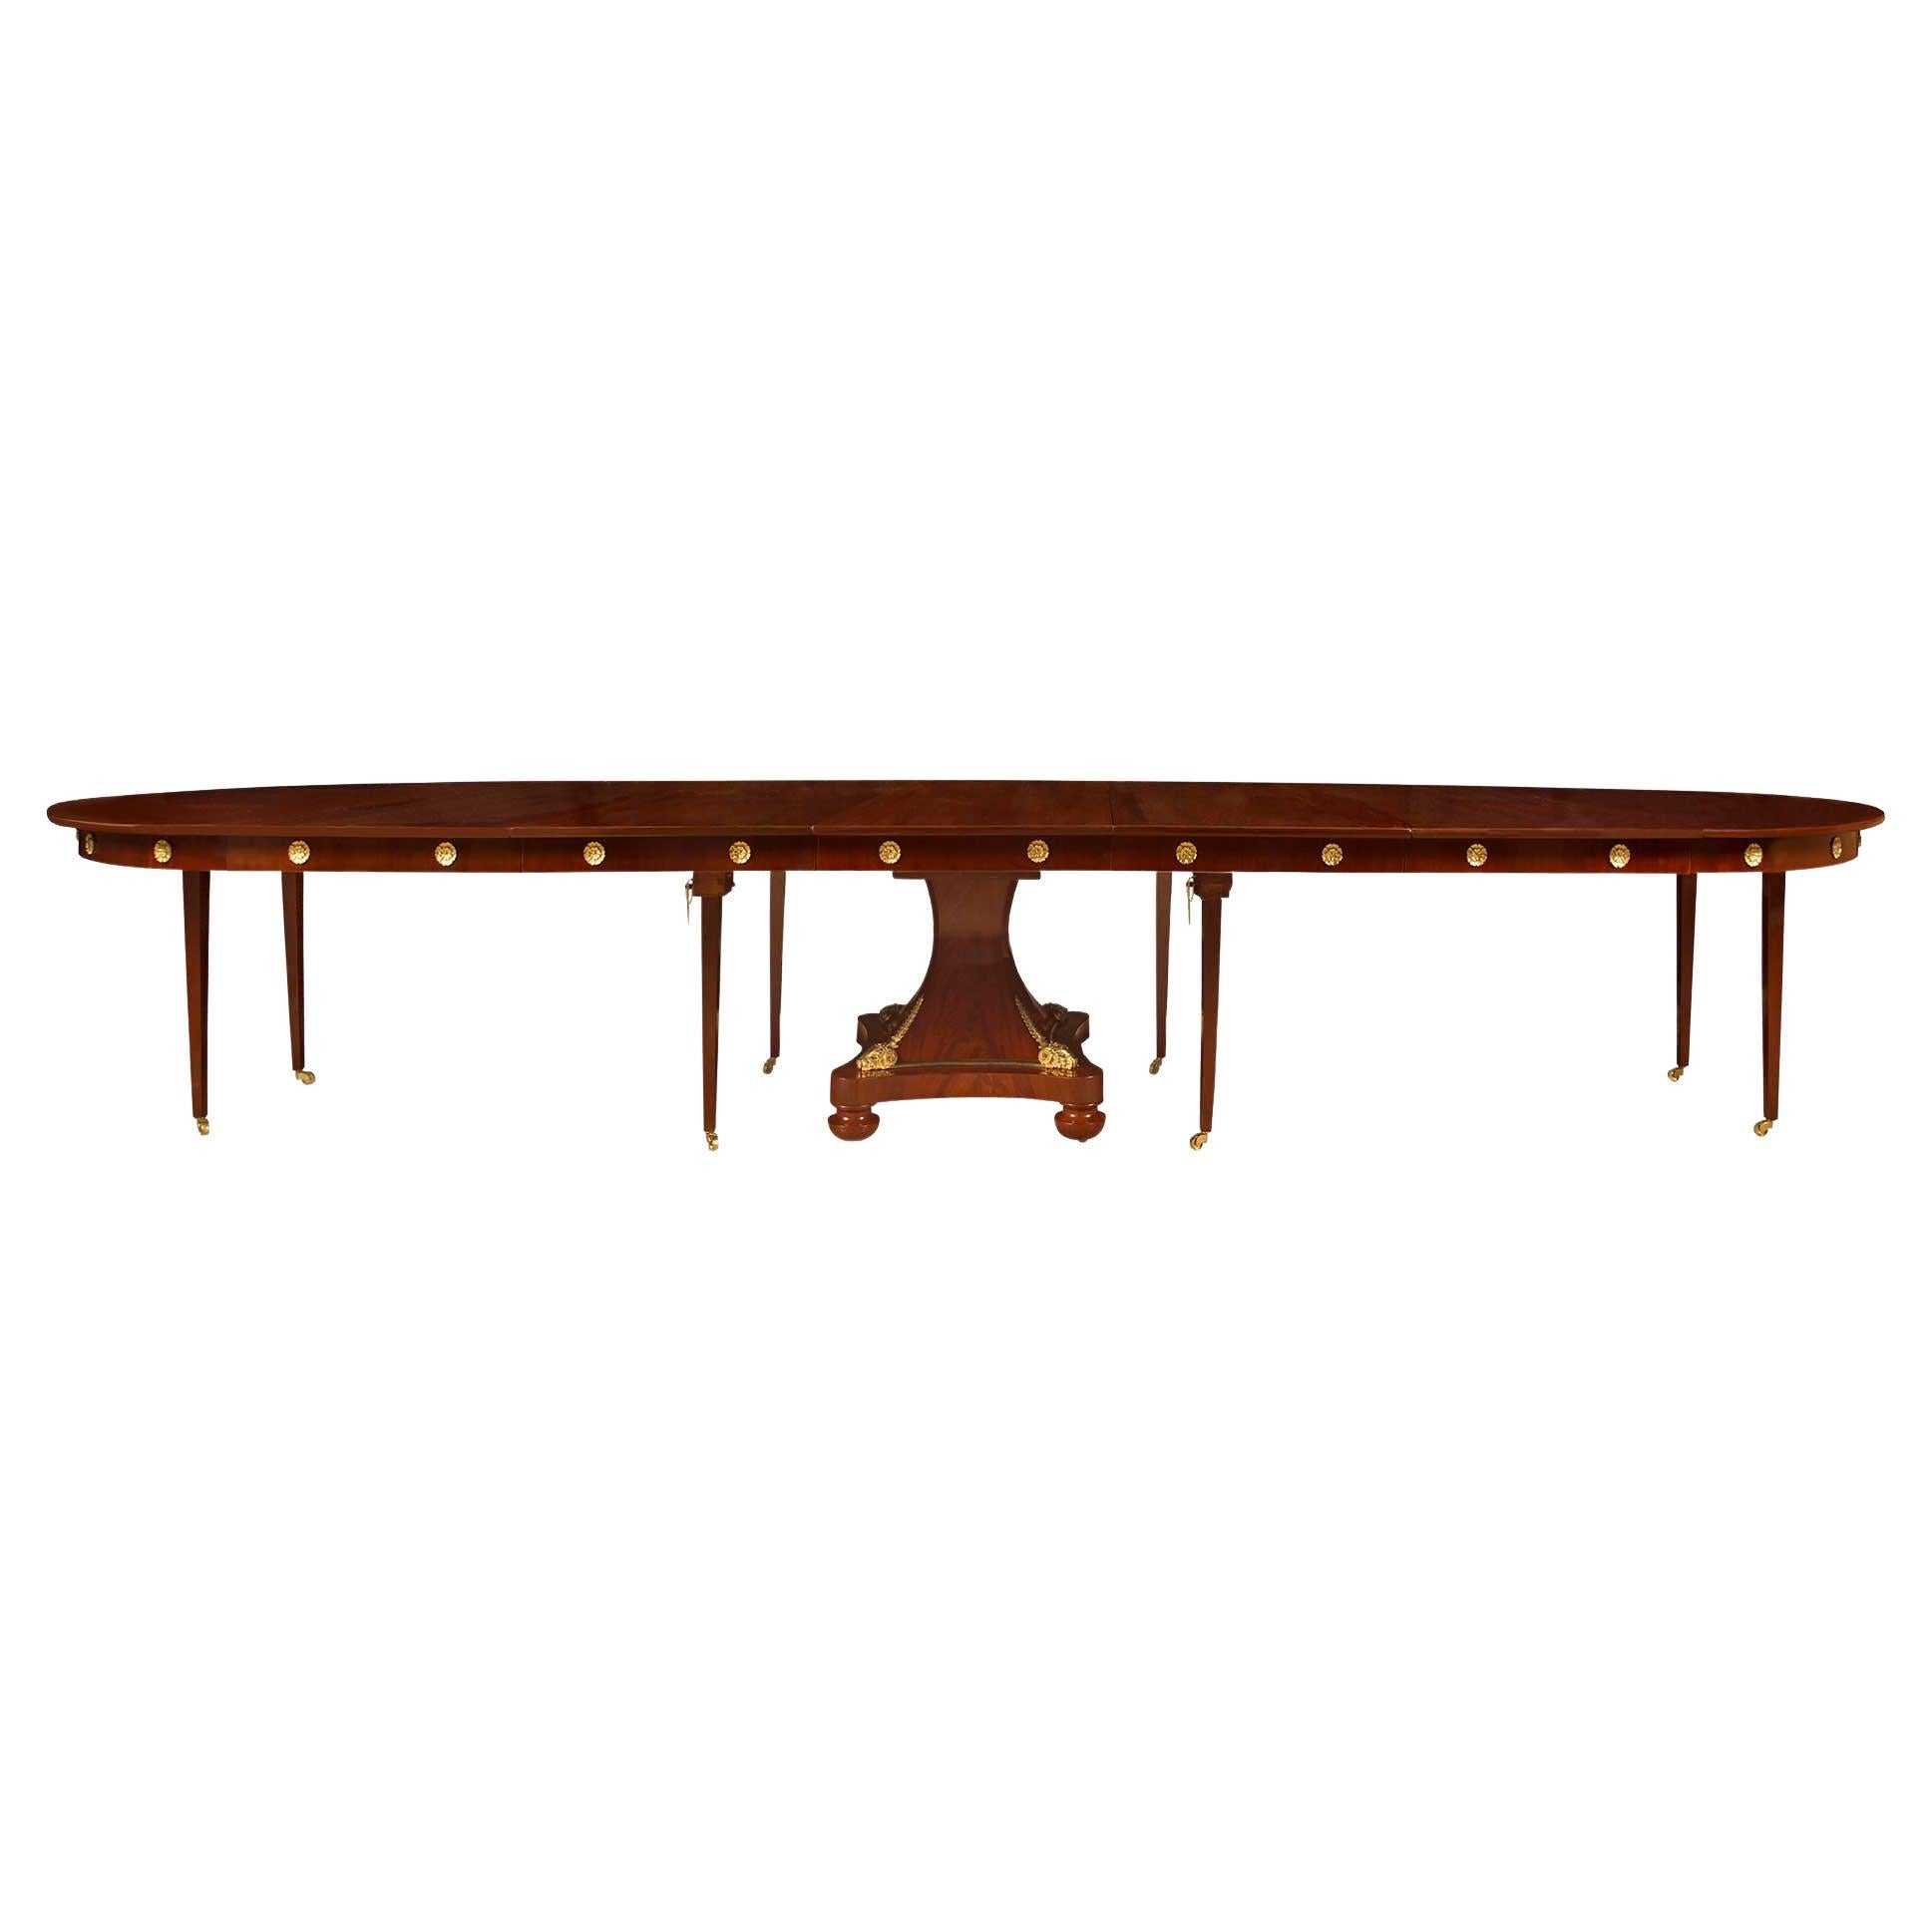 French 19th Century Neoclassical St. Dining Table, Once Owned by Gianni Versace For Sale